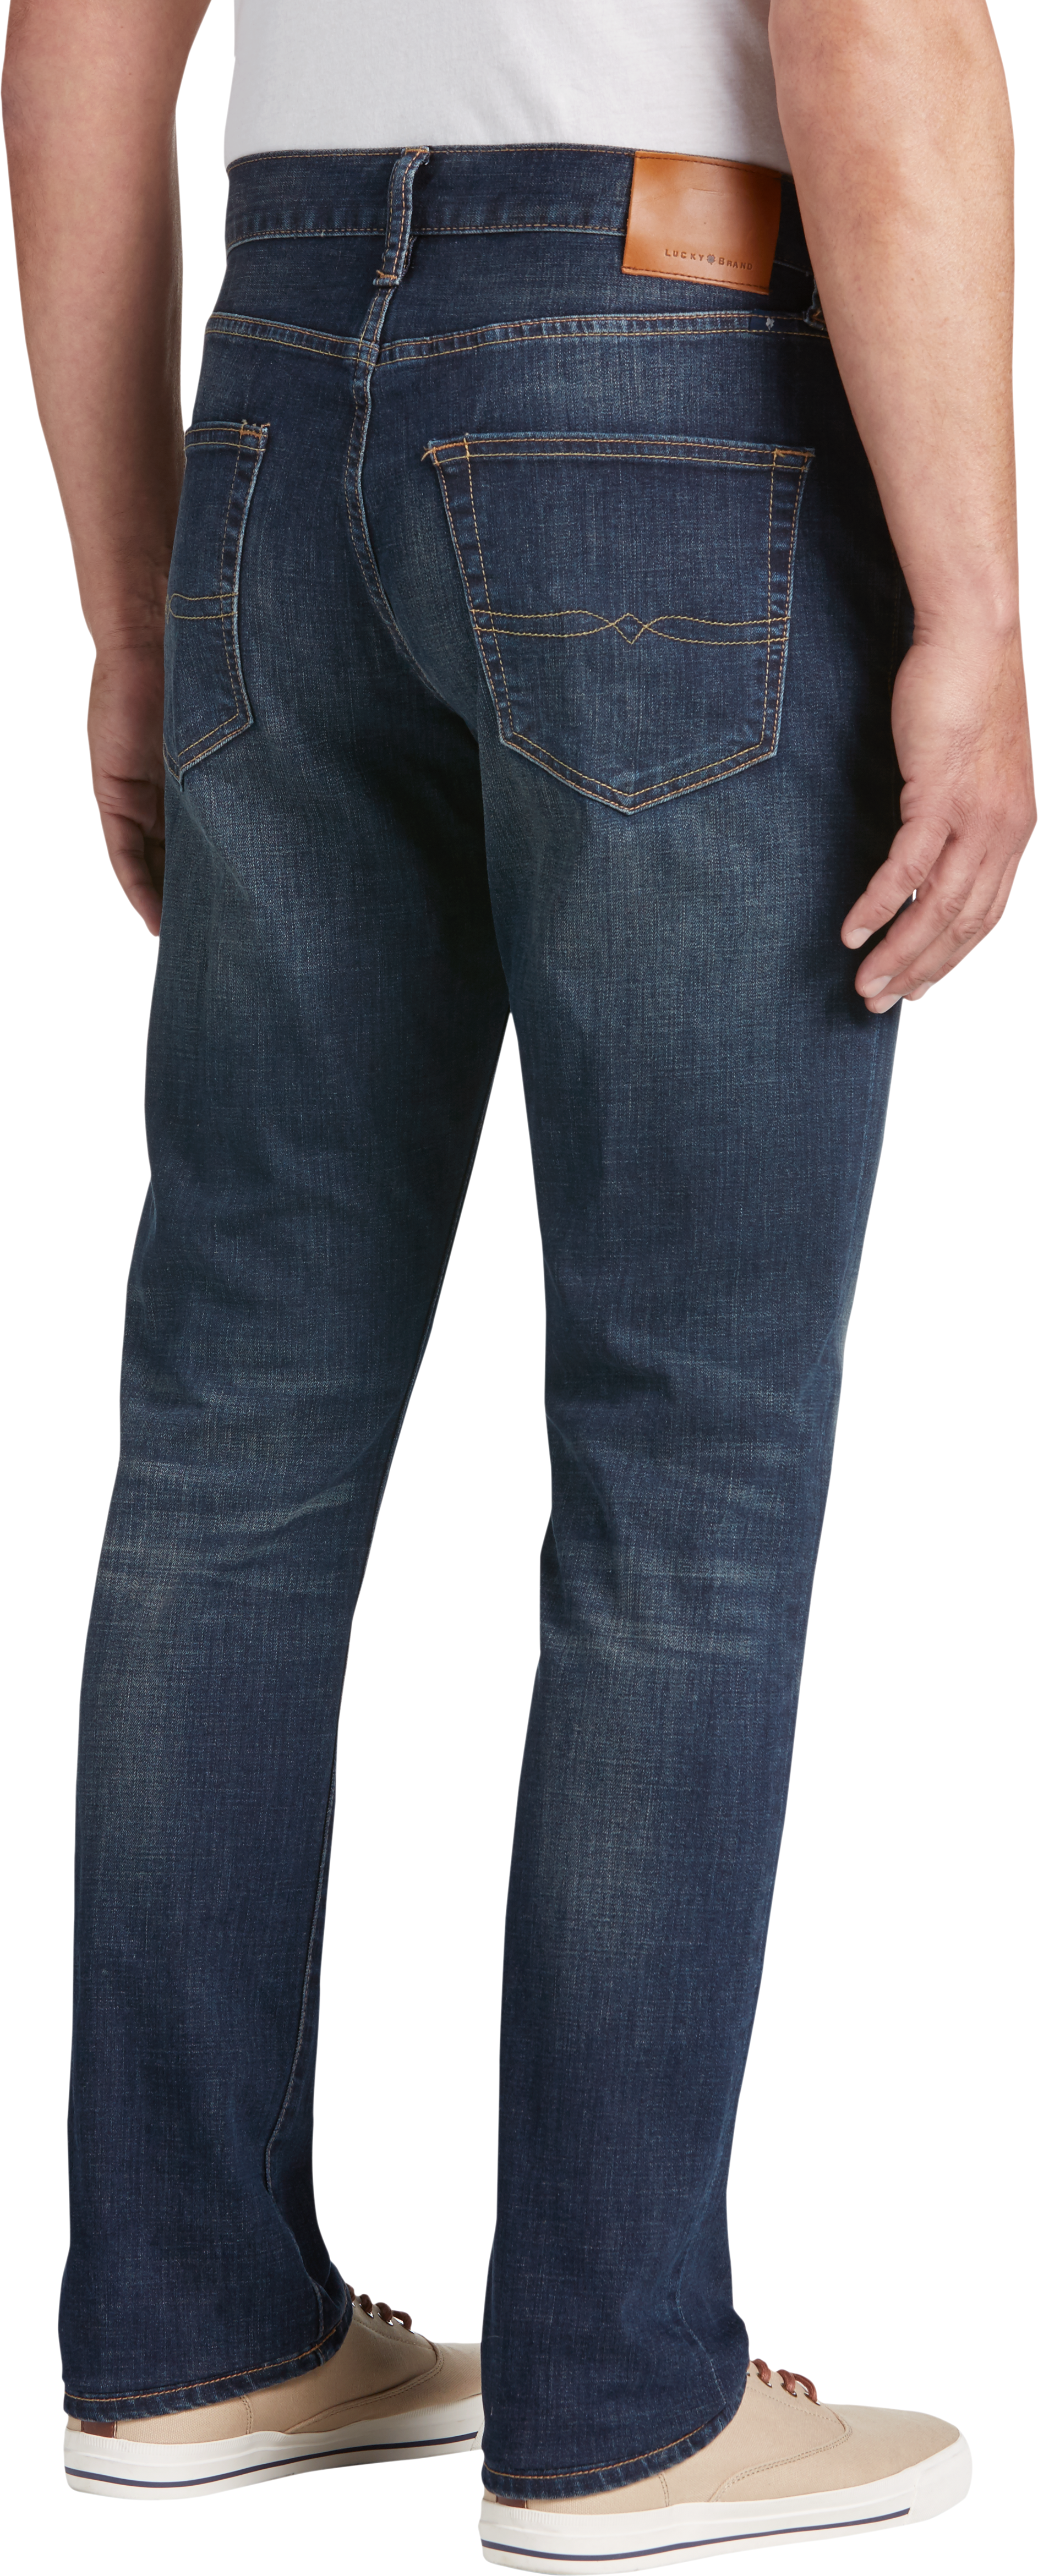 410 Cowell Ranch Athletic Fit Jeans